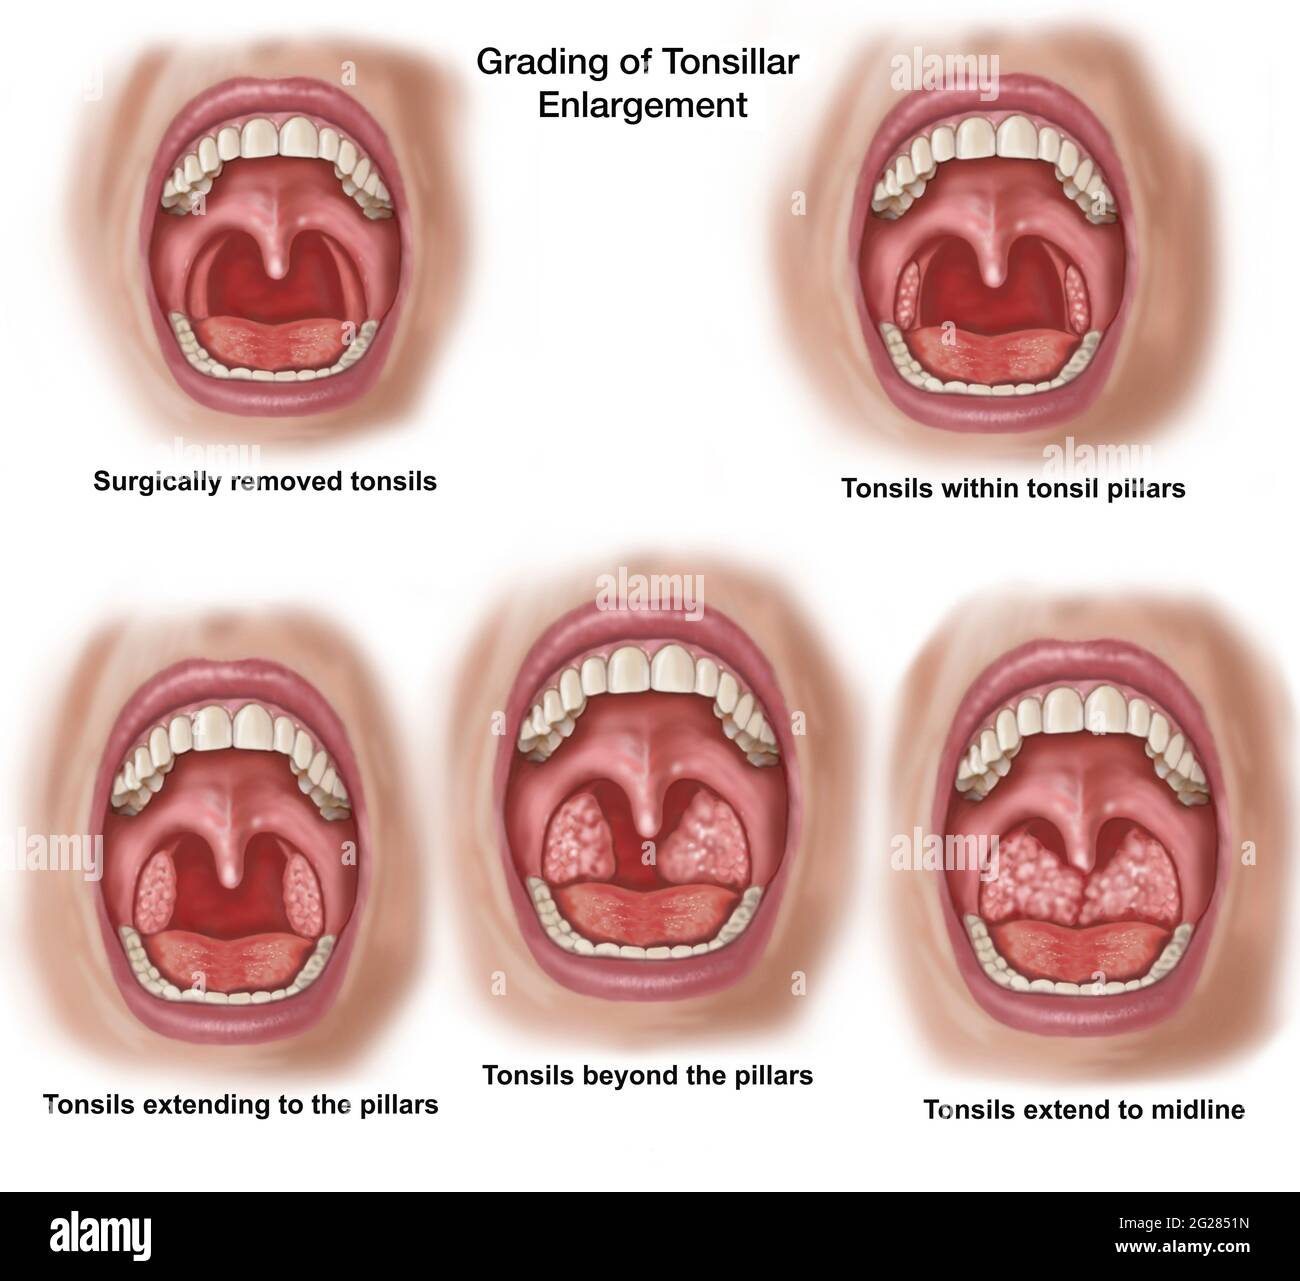 Various stages of tonsillar enlargement, looking into an open mouth. Stock Photo